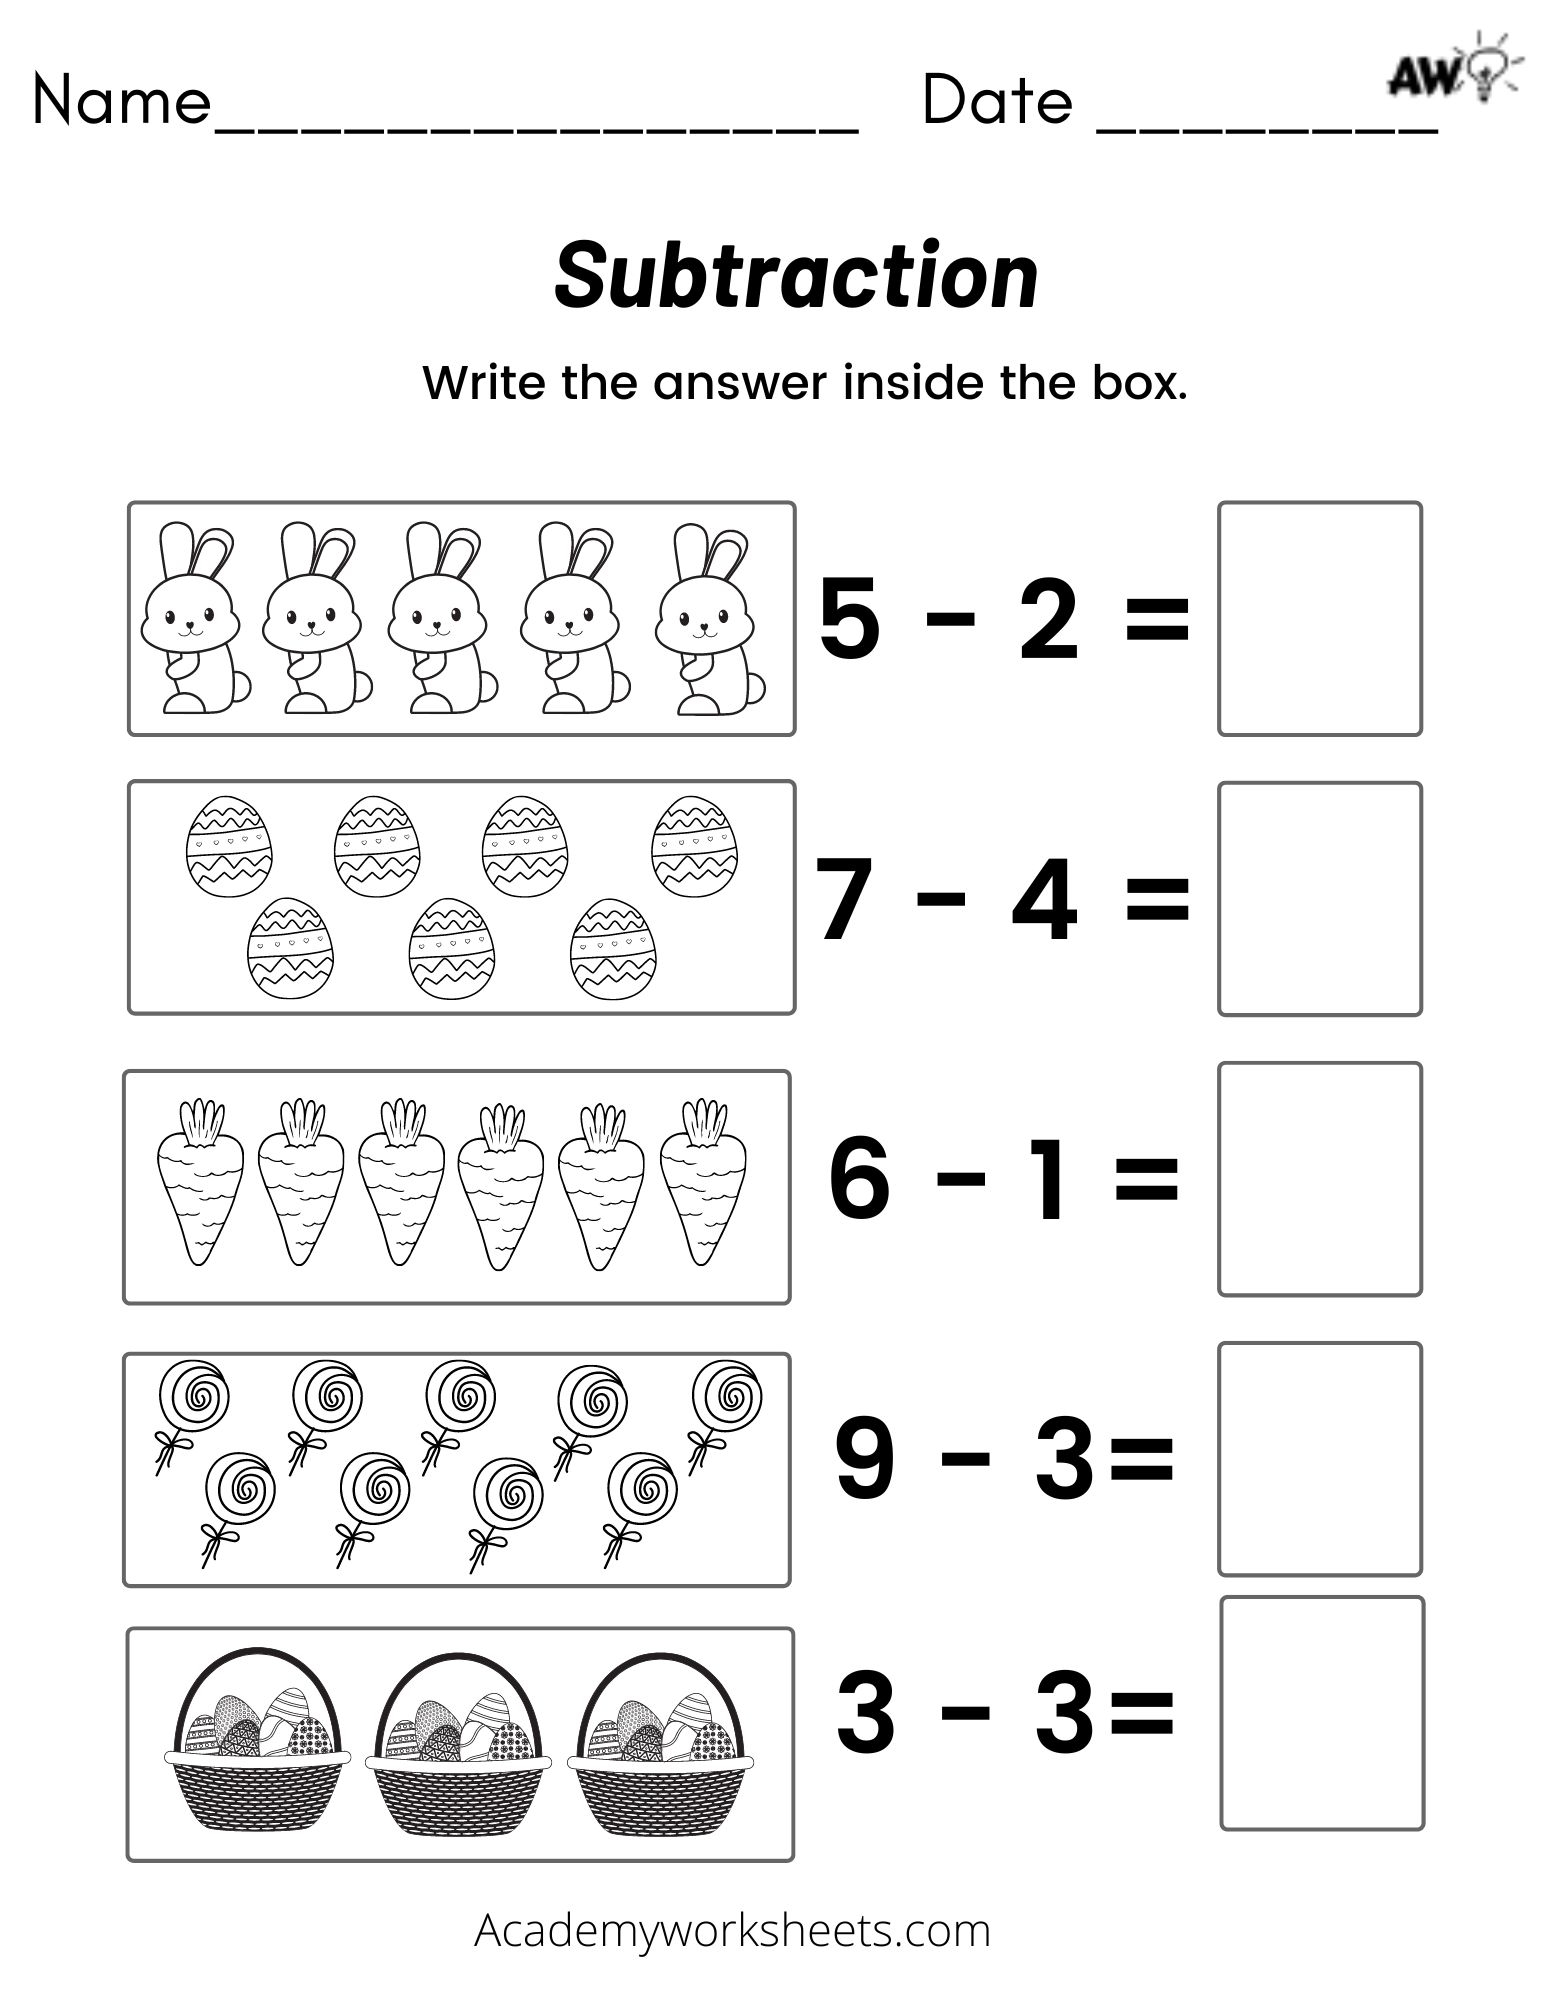 Subtraction Problems Worksheet Using Pictures Academy Worksheets